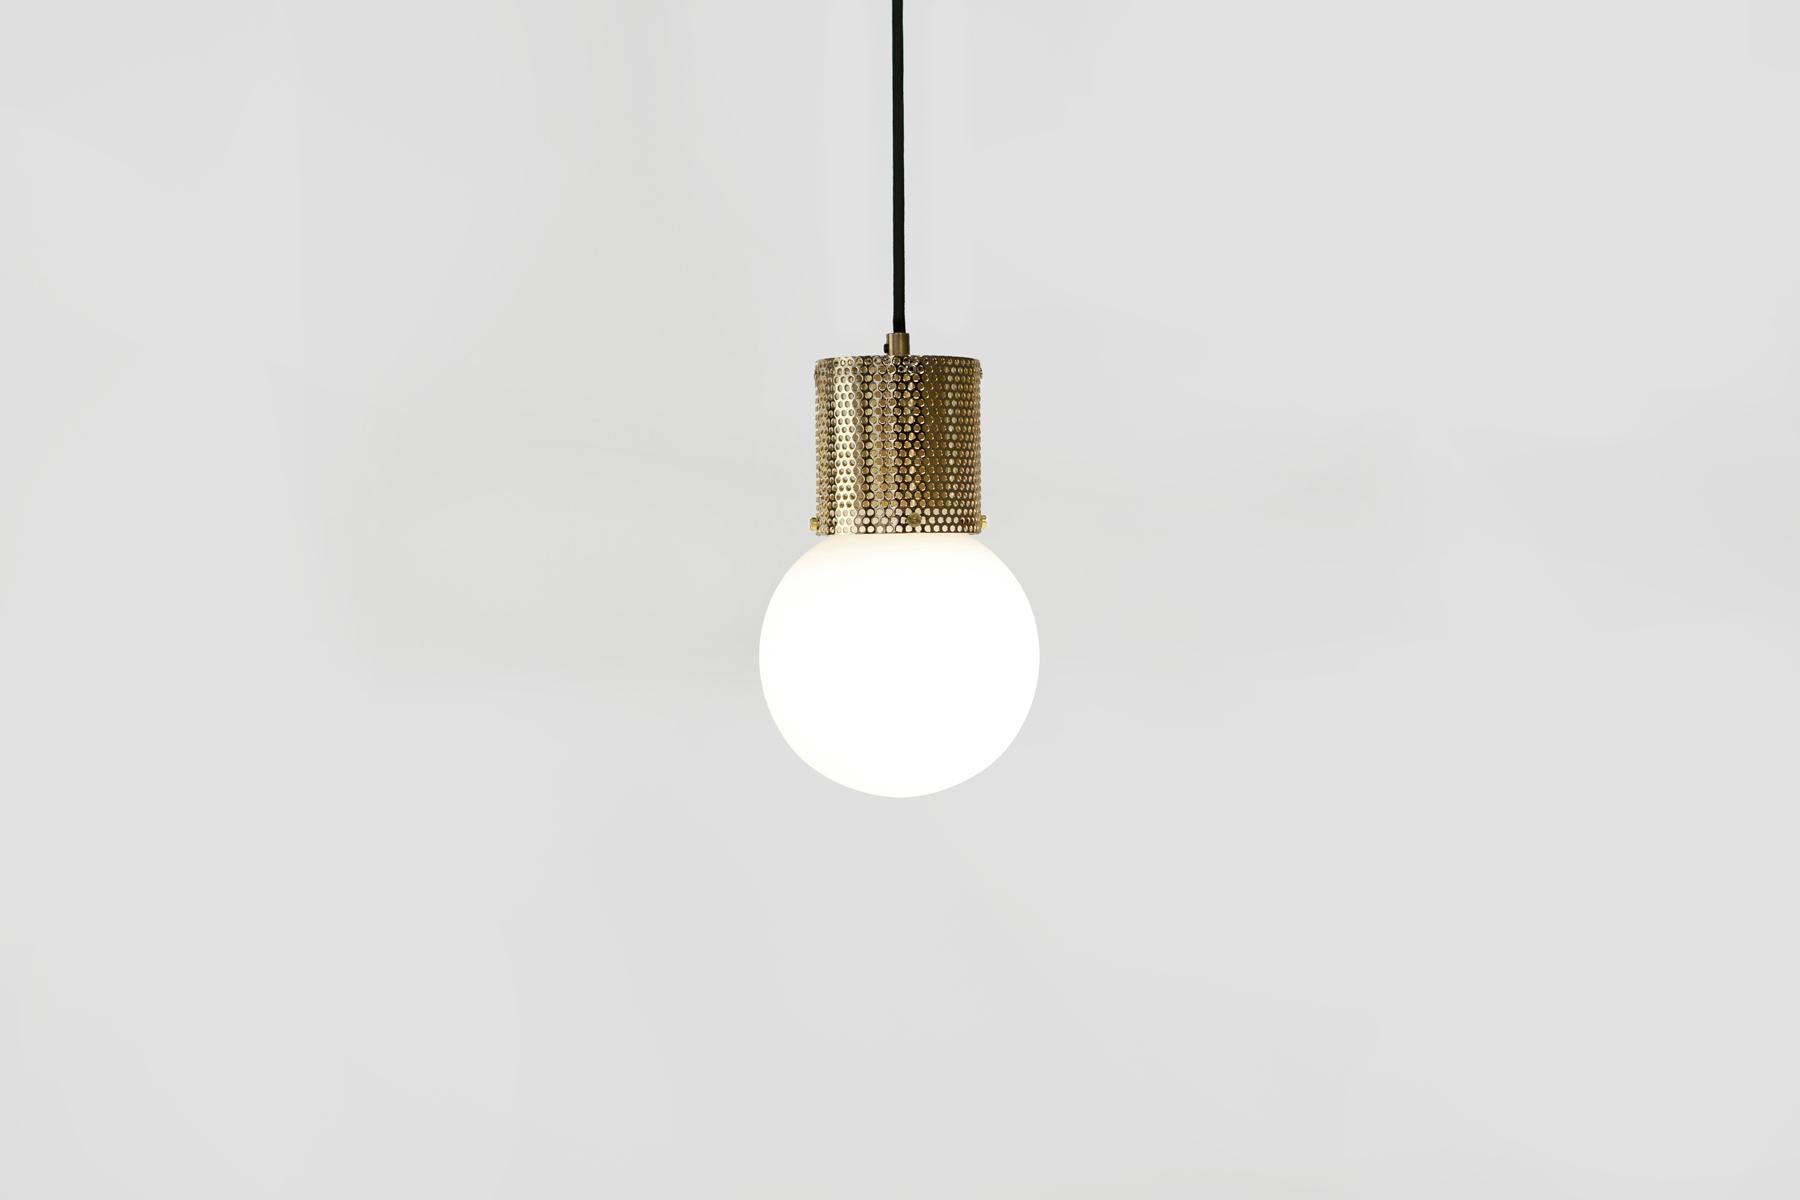 Powder-Coated Perf Pendant Light Small-Black Perforated Tube, Glass Round Orb Shade For Sale